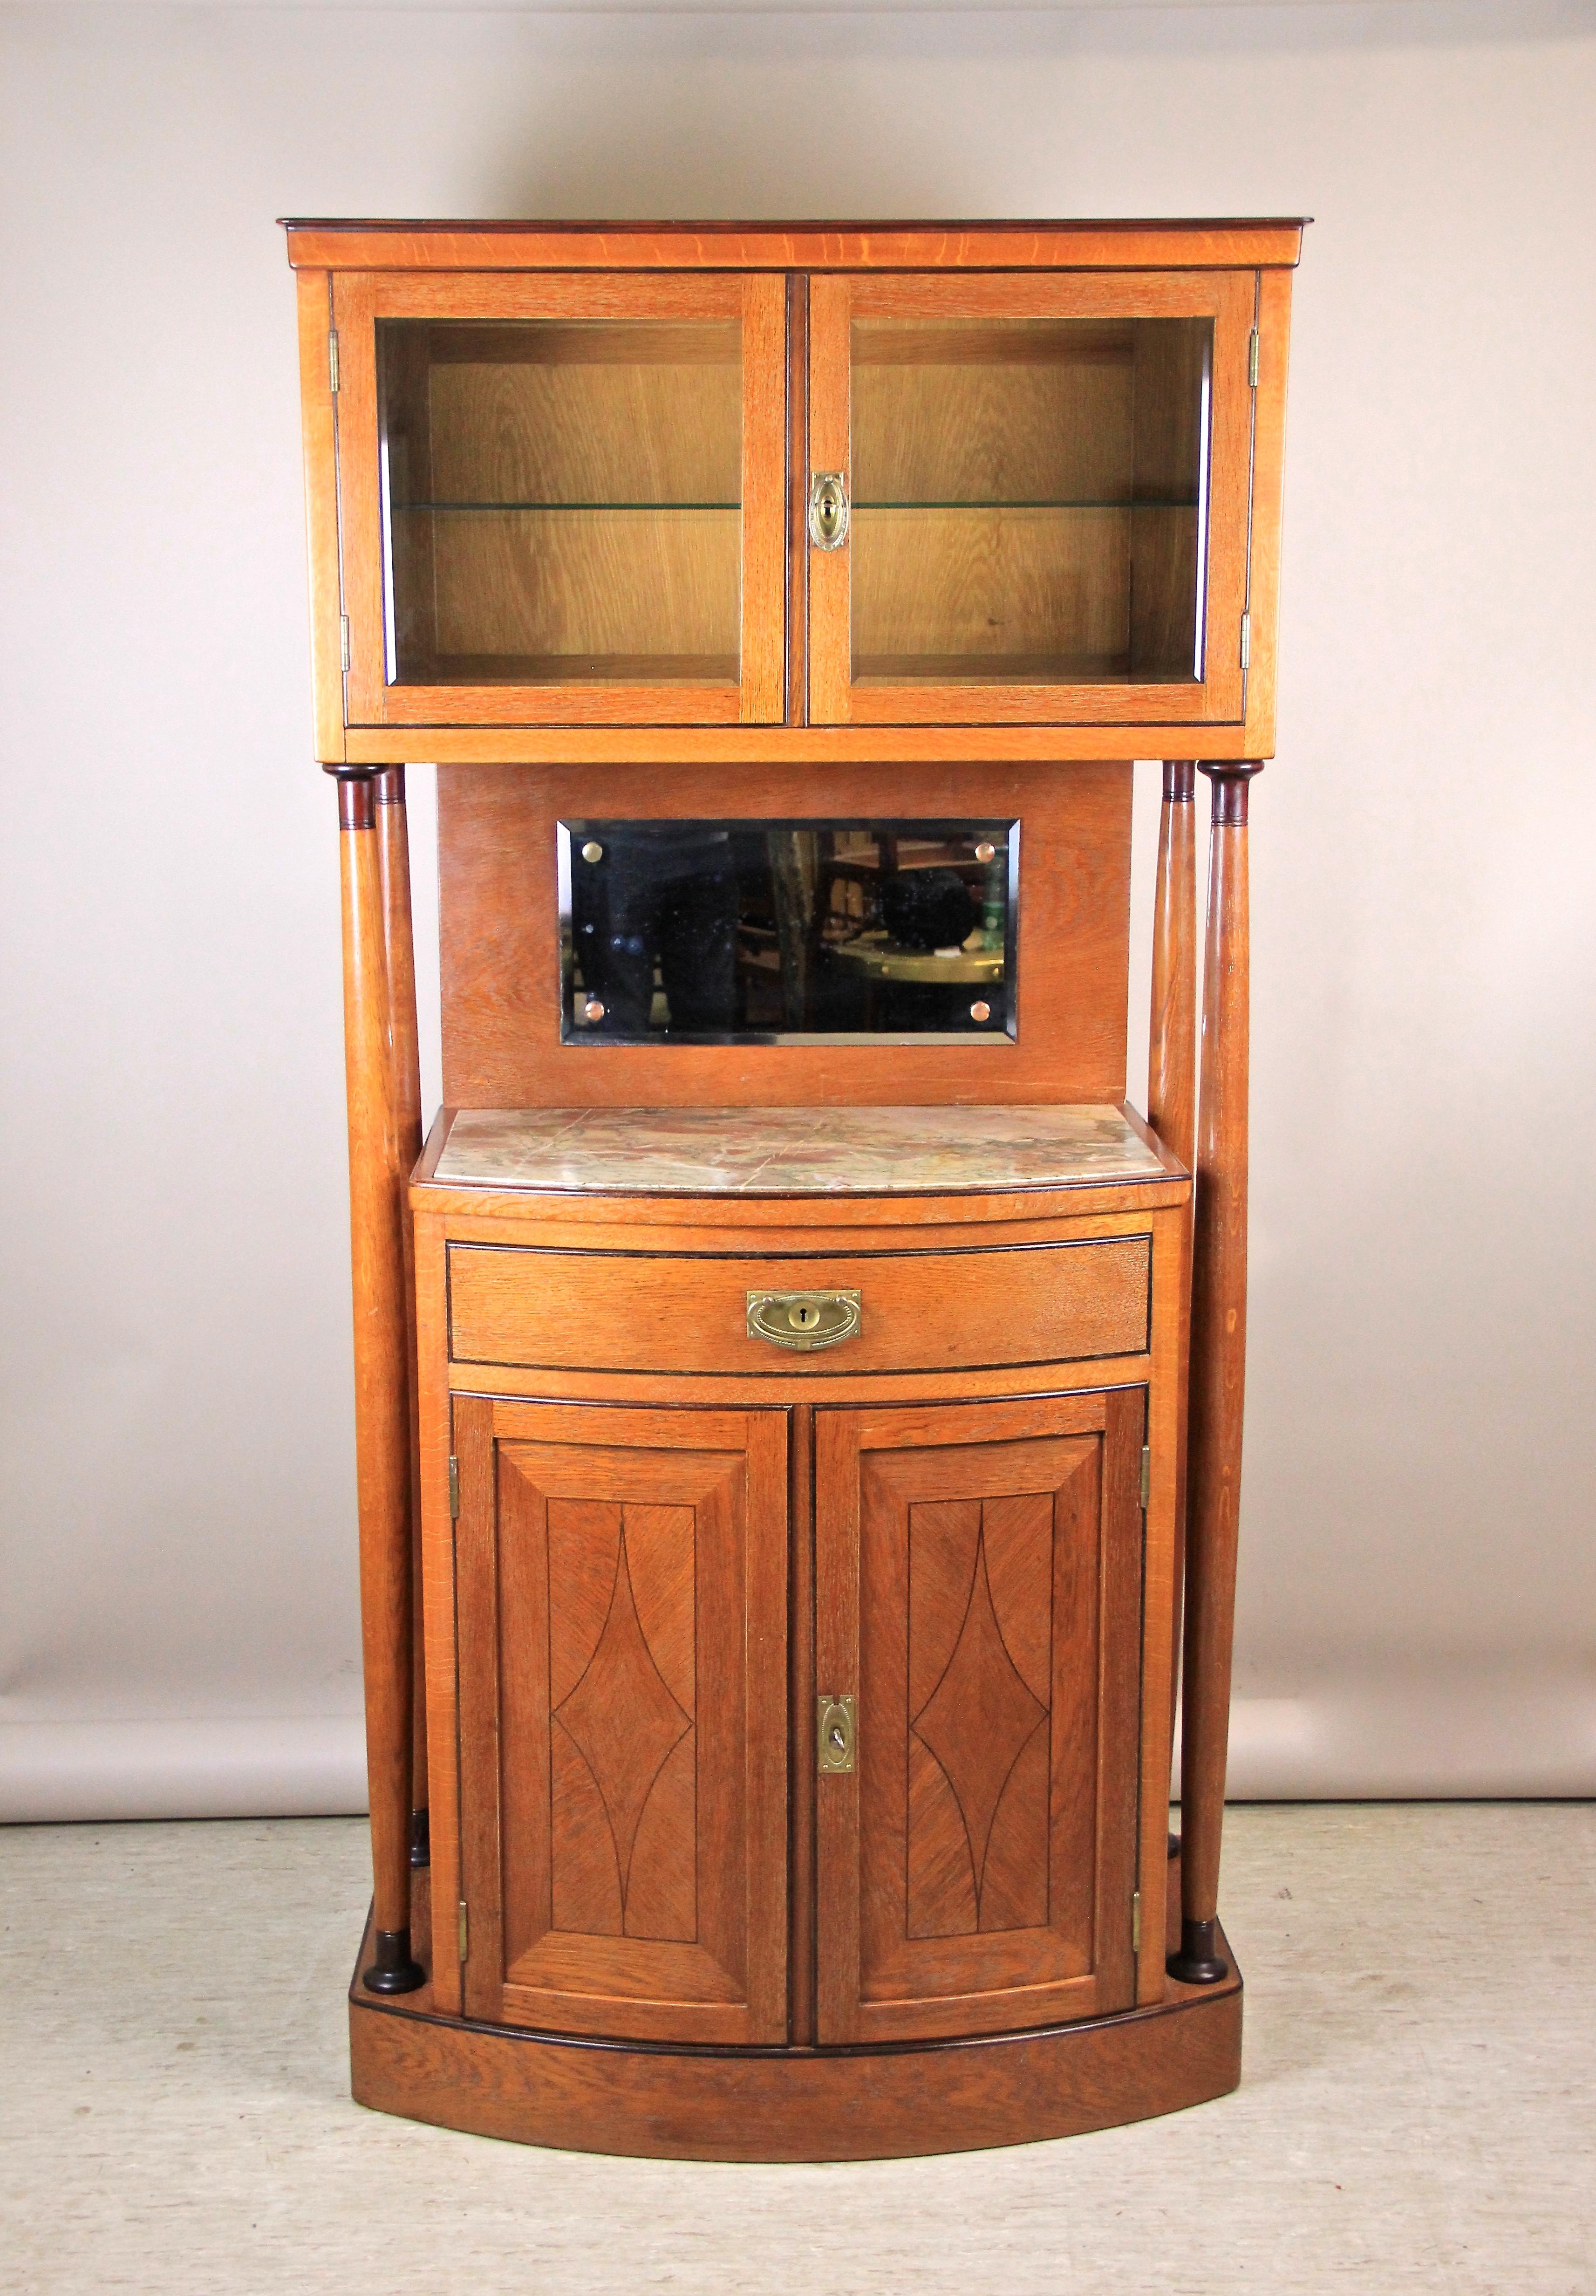 Extraordinary Art Nouveau cabinet/ buffet originating from Austria, circa 1915. The lower part with one drawer and two doors shows a wonderful convex shaped design. The upper part, providing a smaller compartment behind two glass-panelled doors,